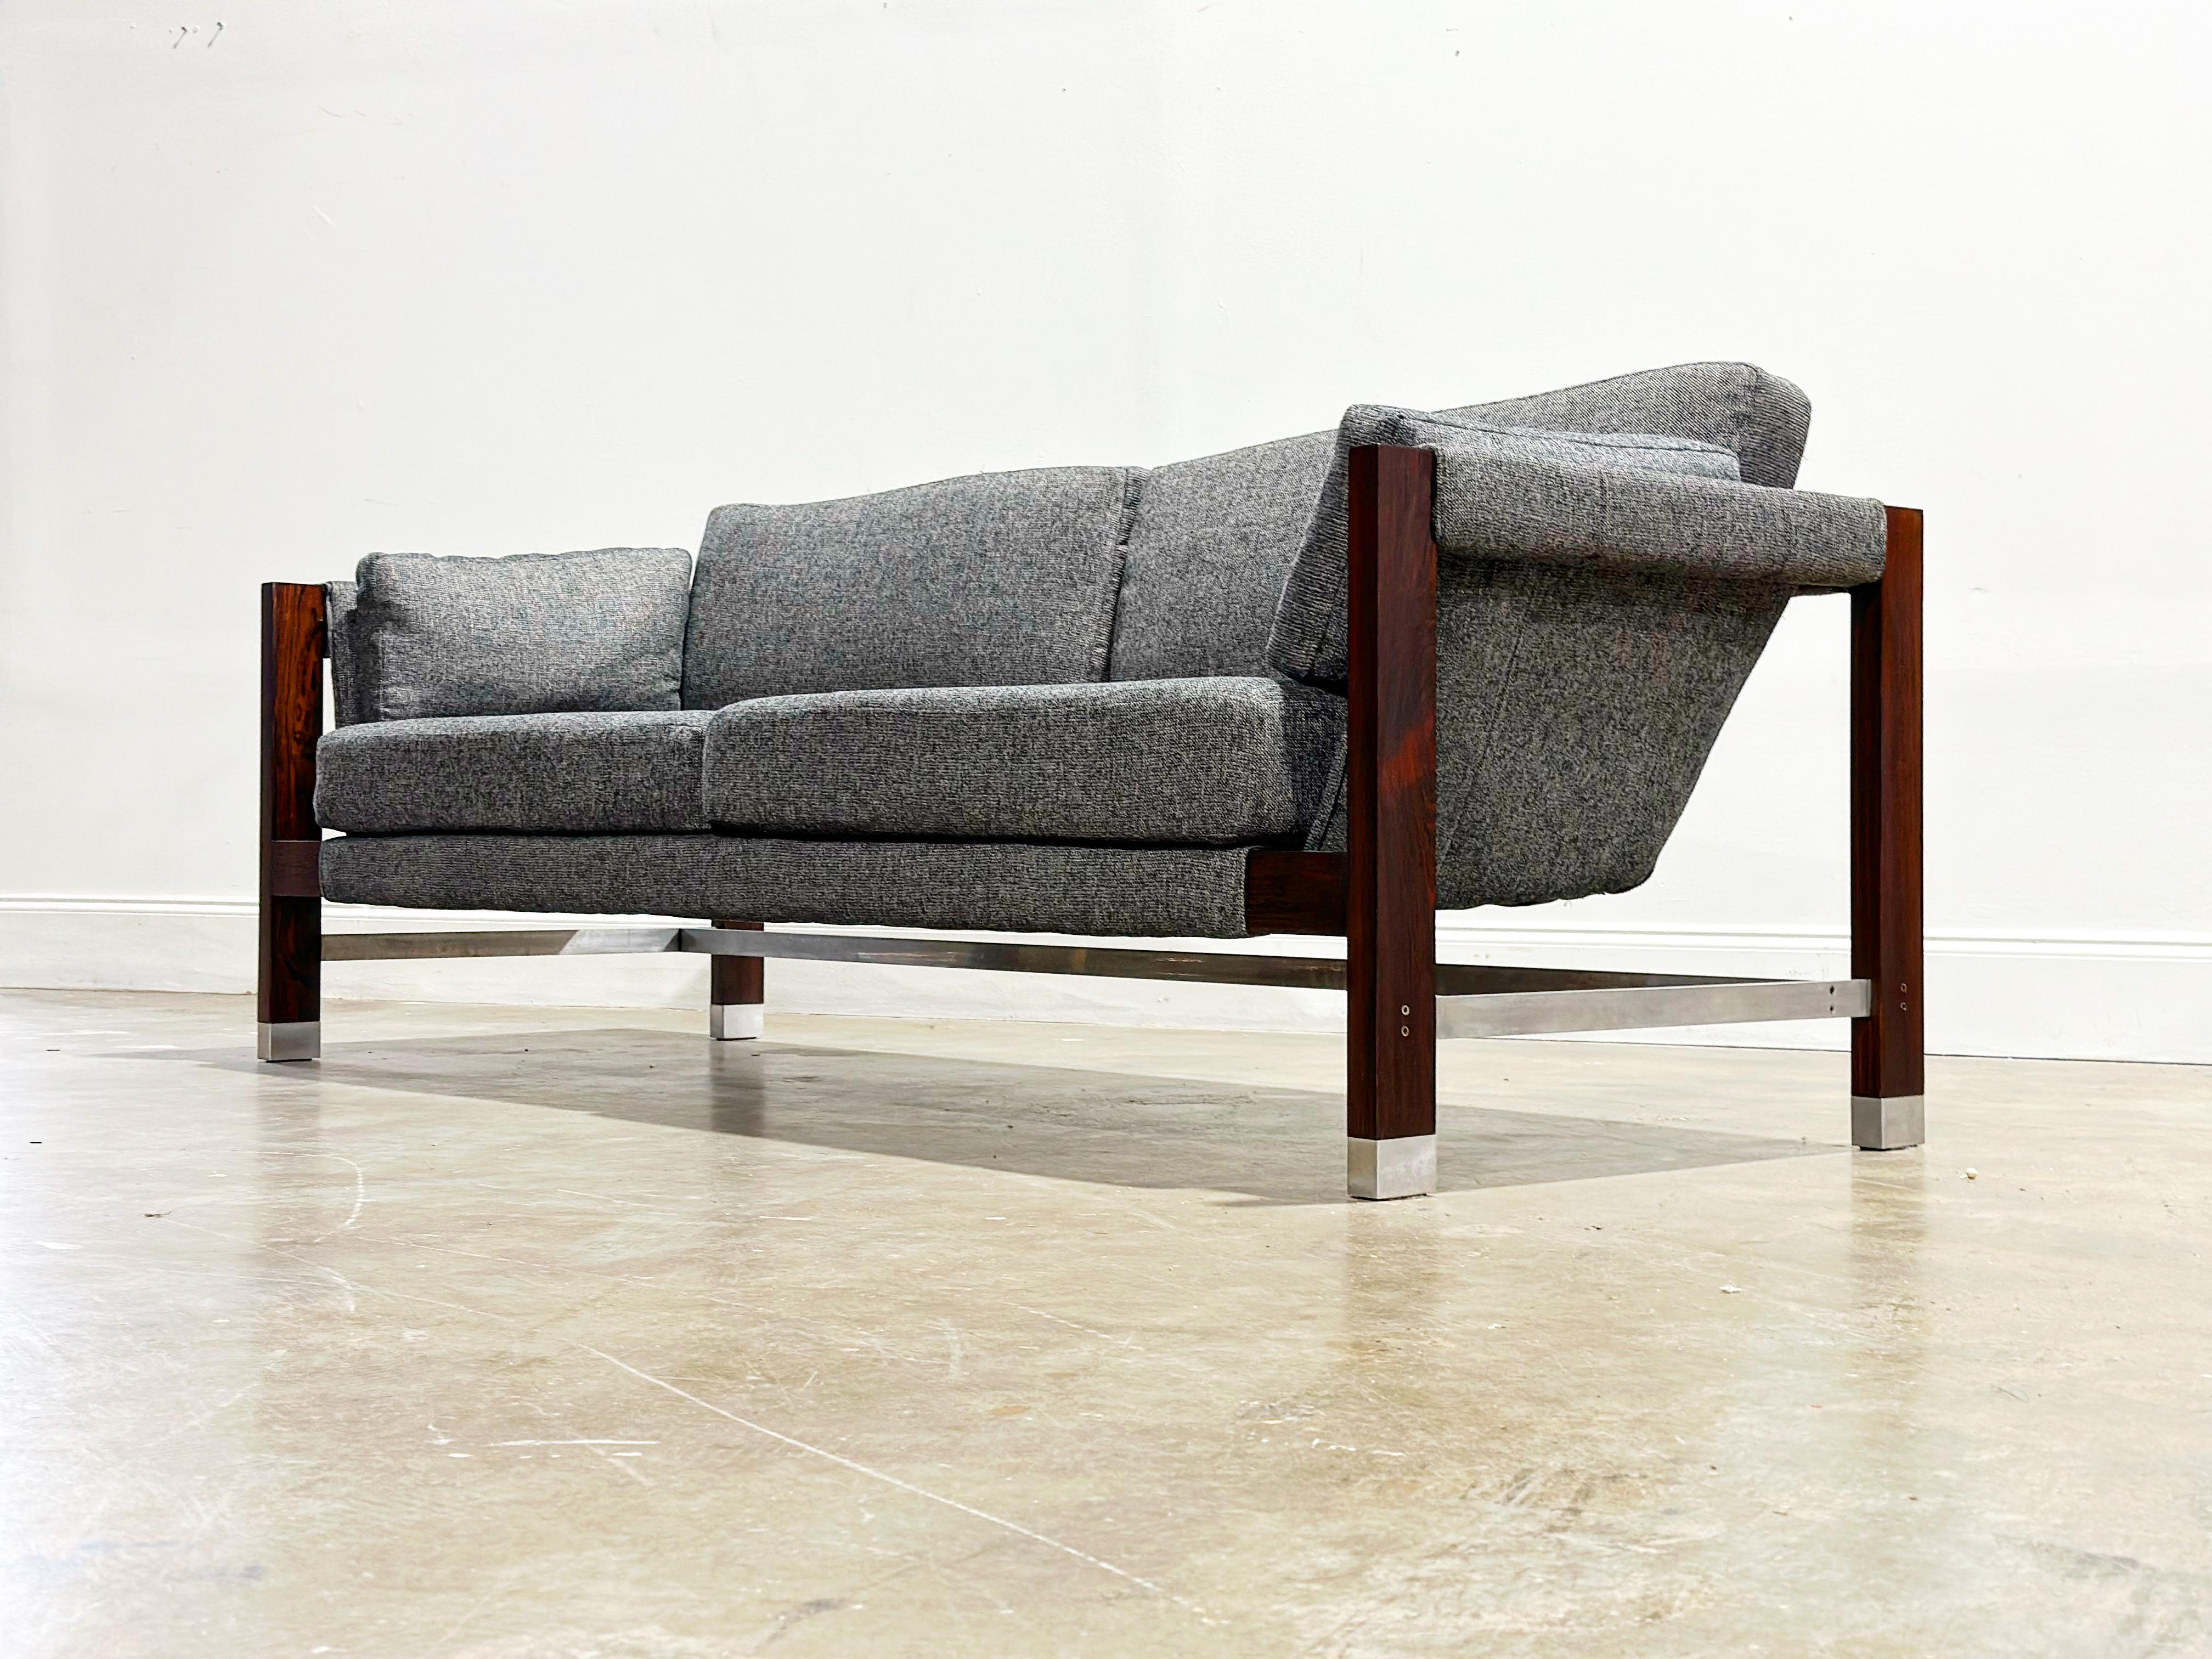 Rare open frame floating sling sofa by Jack Cartwright for Founders Furniture, circa 1960's. Minimalist rosewood and aluminum frame. Absolutely stunning from any angle. Perfect statement piece to anchor a room. 

Fully restored with all new soft